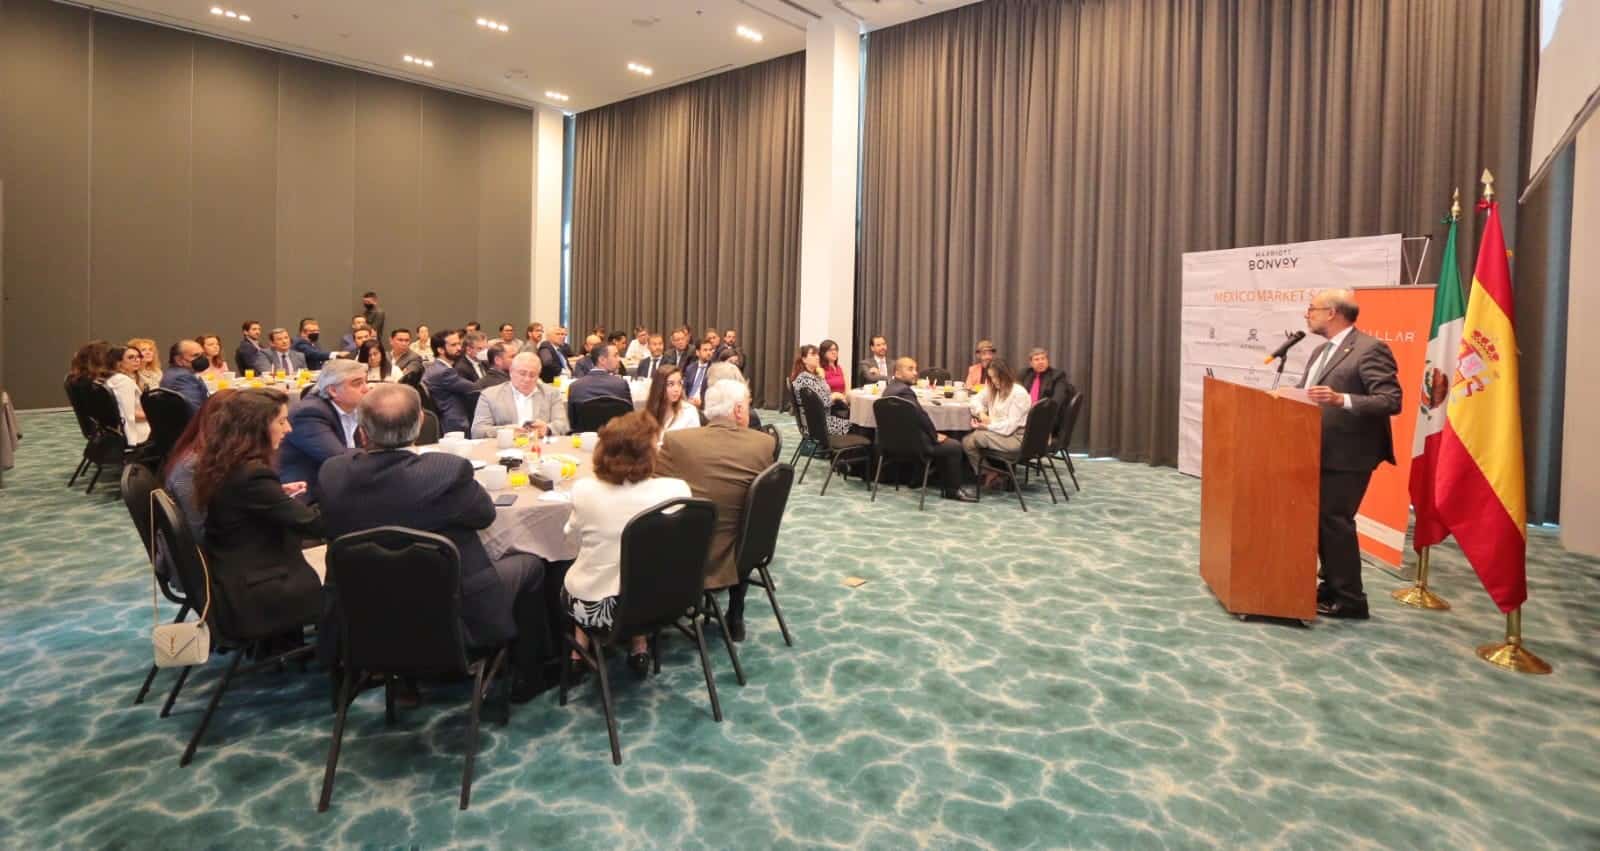 Image of the colleagues from Malasa Mex Contract attending one of the breakfasts organized by the Spanish Chamber of Commerce in Mexico.